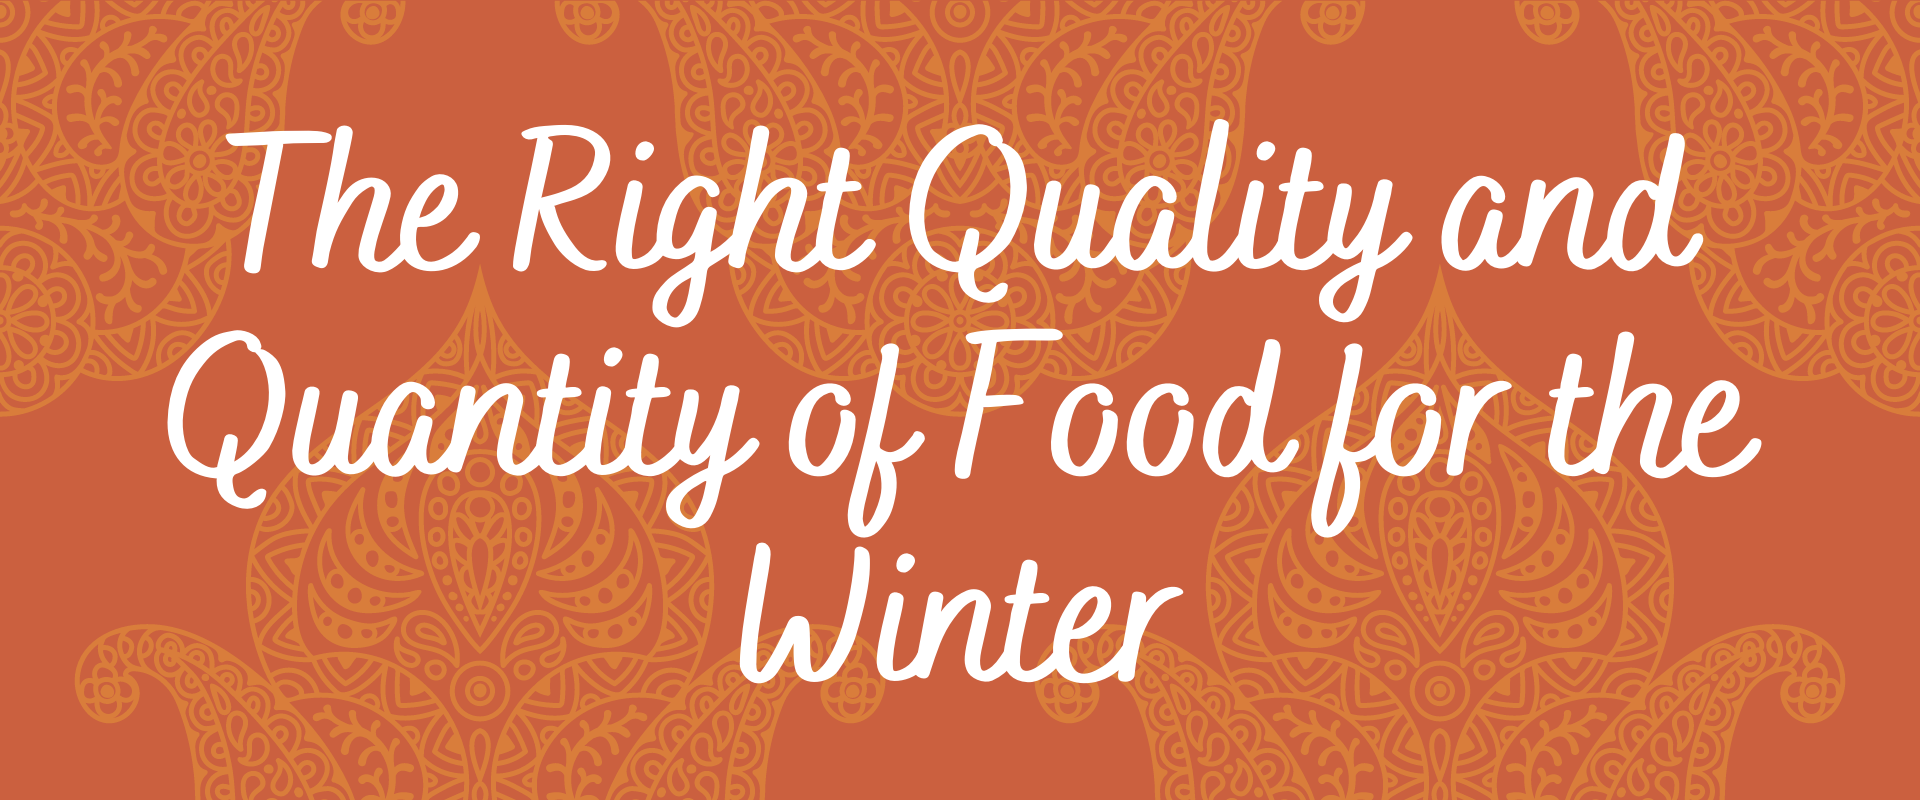 The Right Quality & Quantity of Food For the Winter